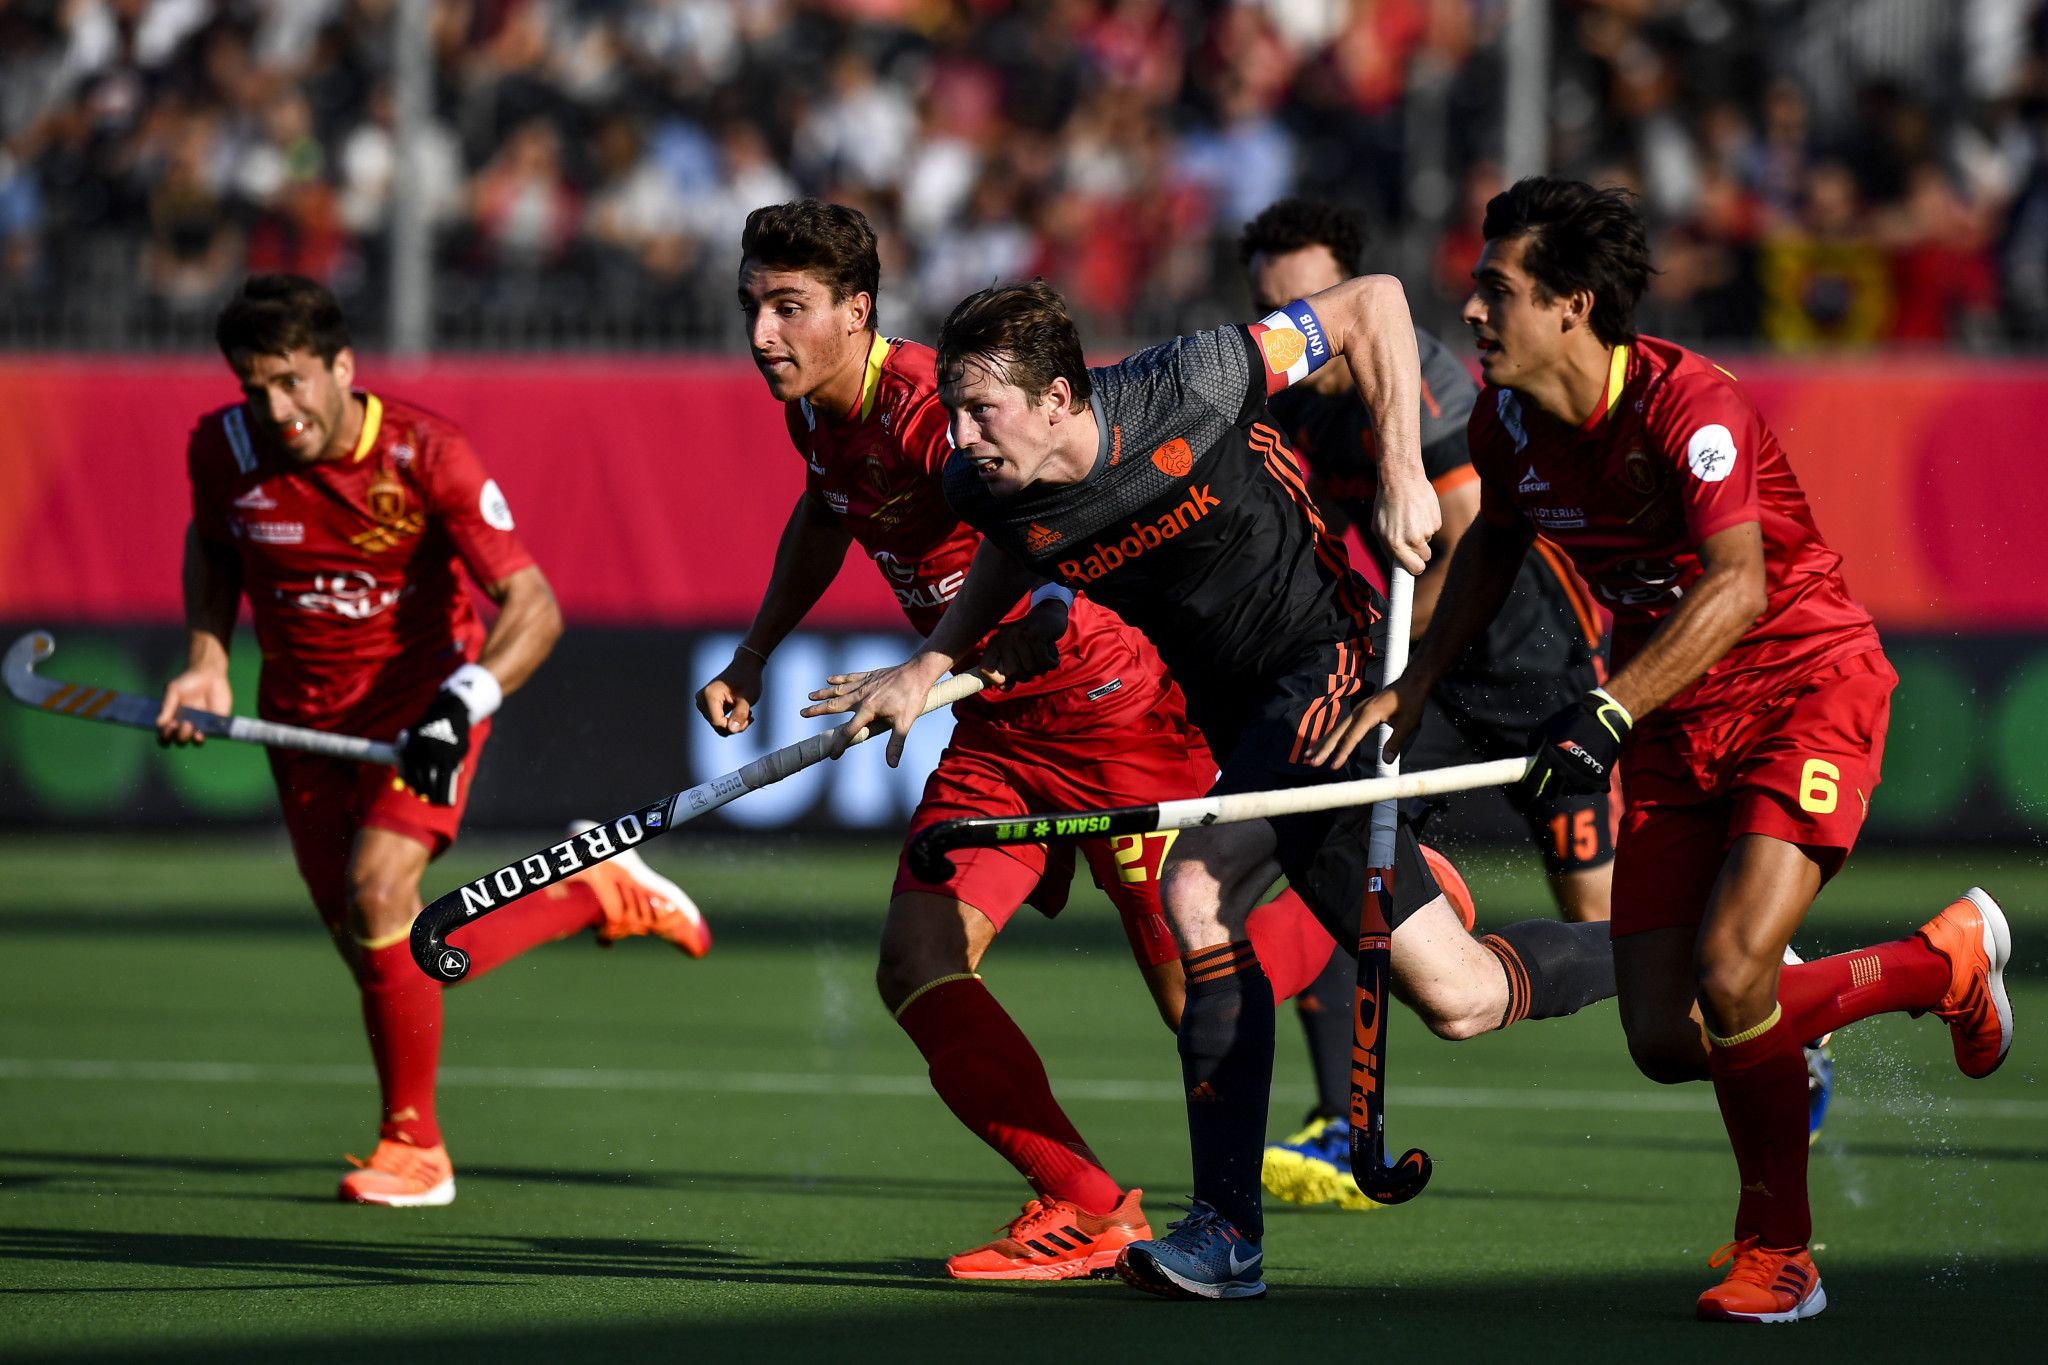 Spain's Marc Bolto, left, and Ignacio Rodriguez, right, fight for the ball with Seve Van Ass of The Netherlands ©Getty Images 